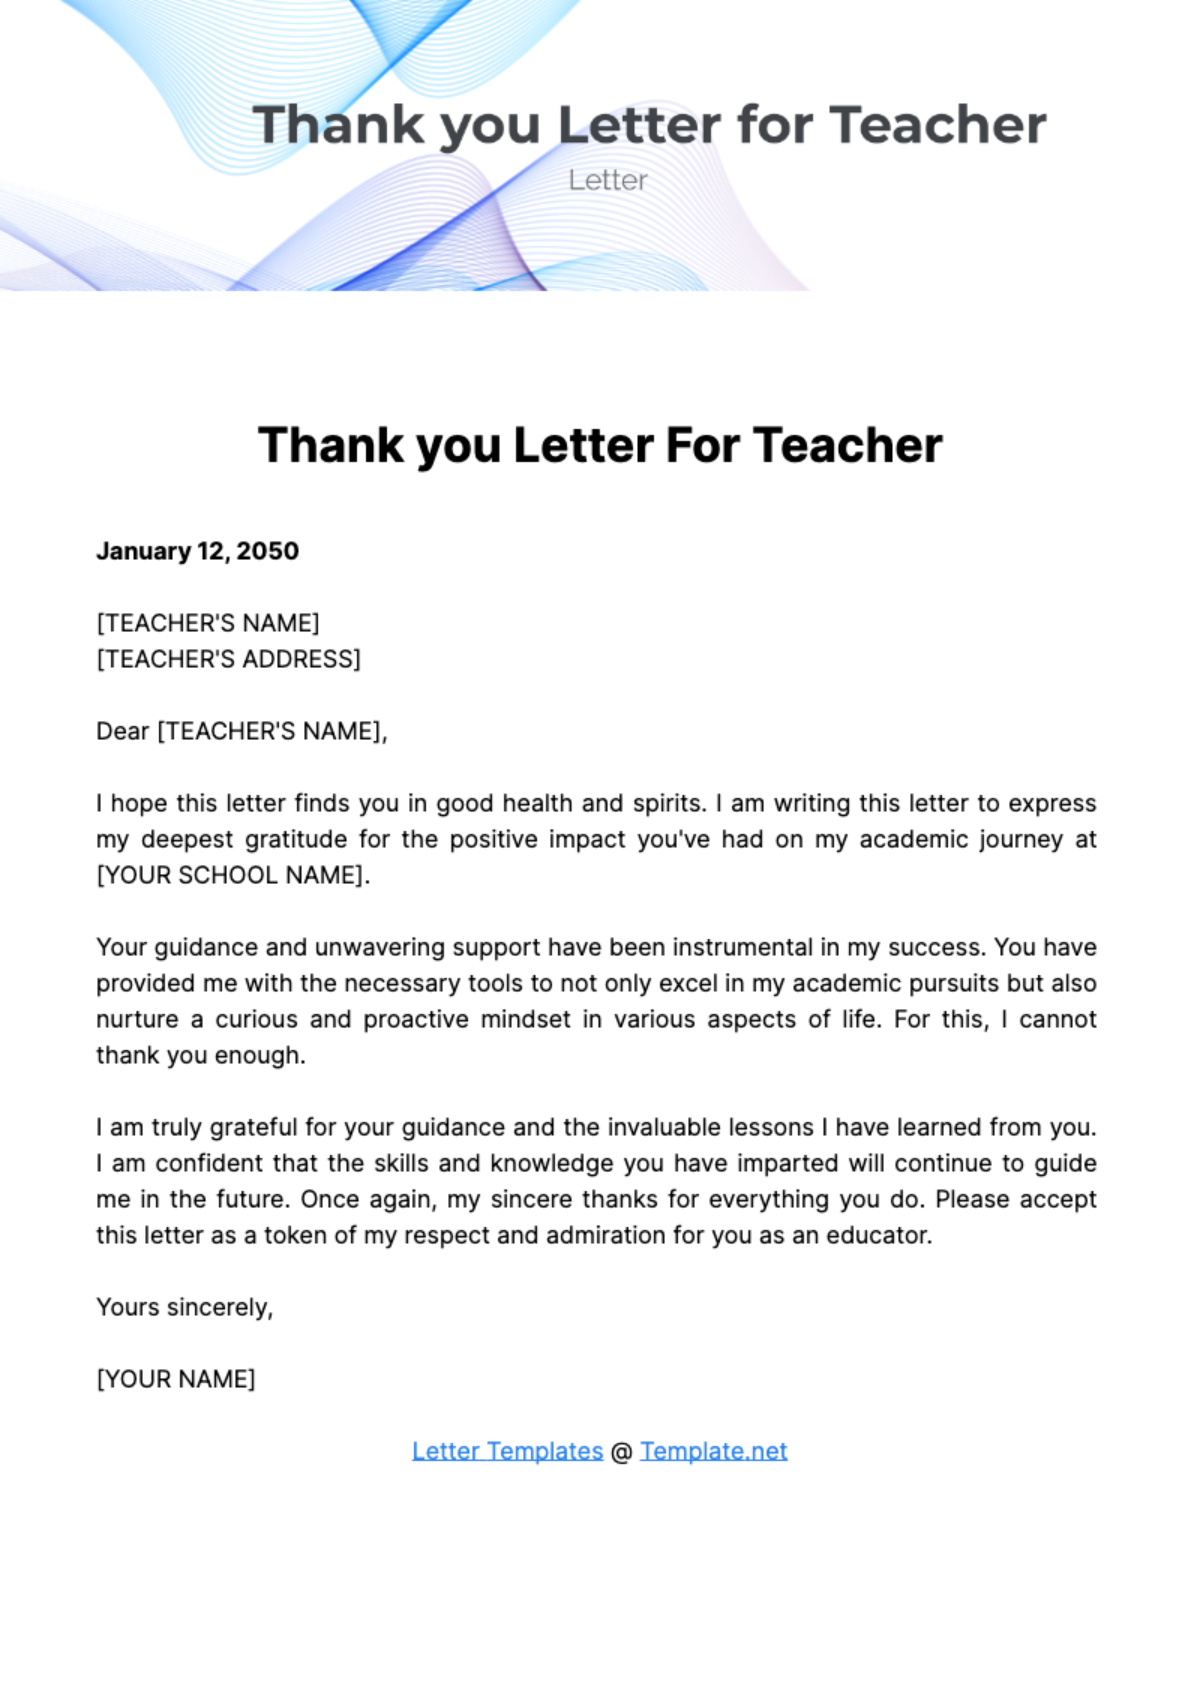 Free Thank you Letter for Teacher Template